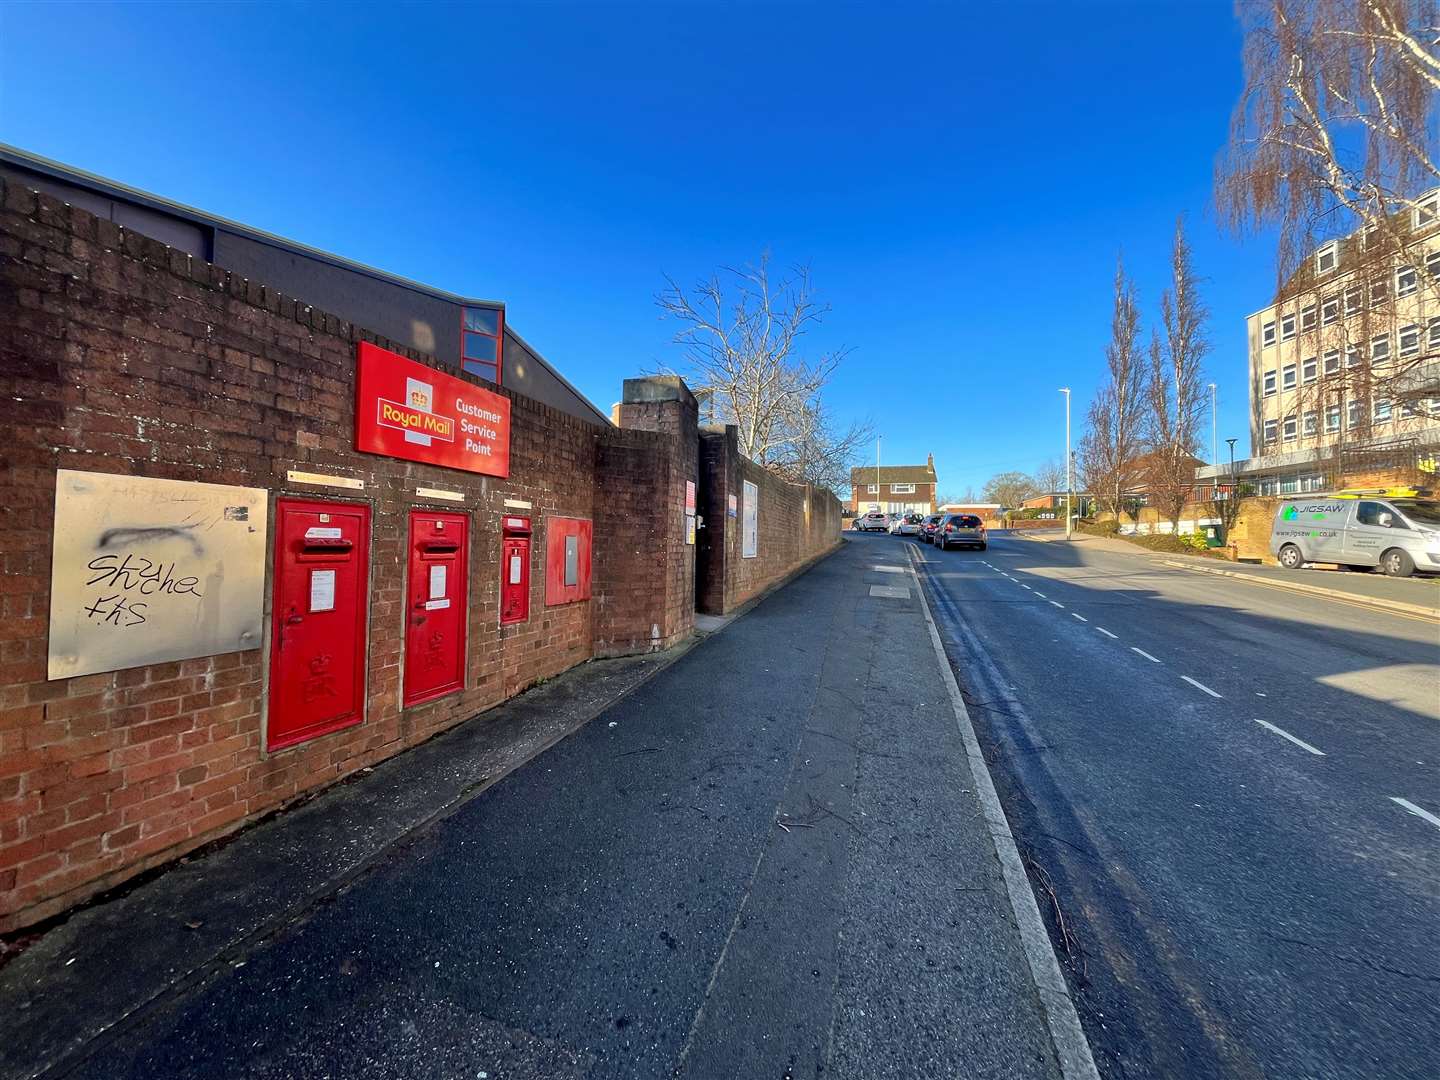 Parking bays have been installed outside Ashford’s Royal Mail sorting office in Tannery Lane